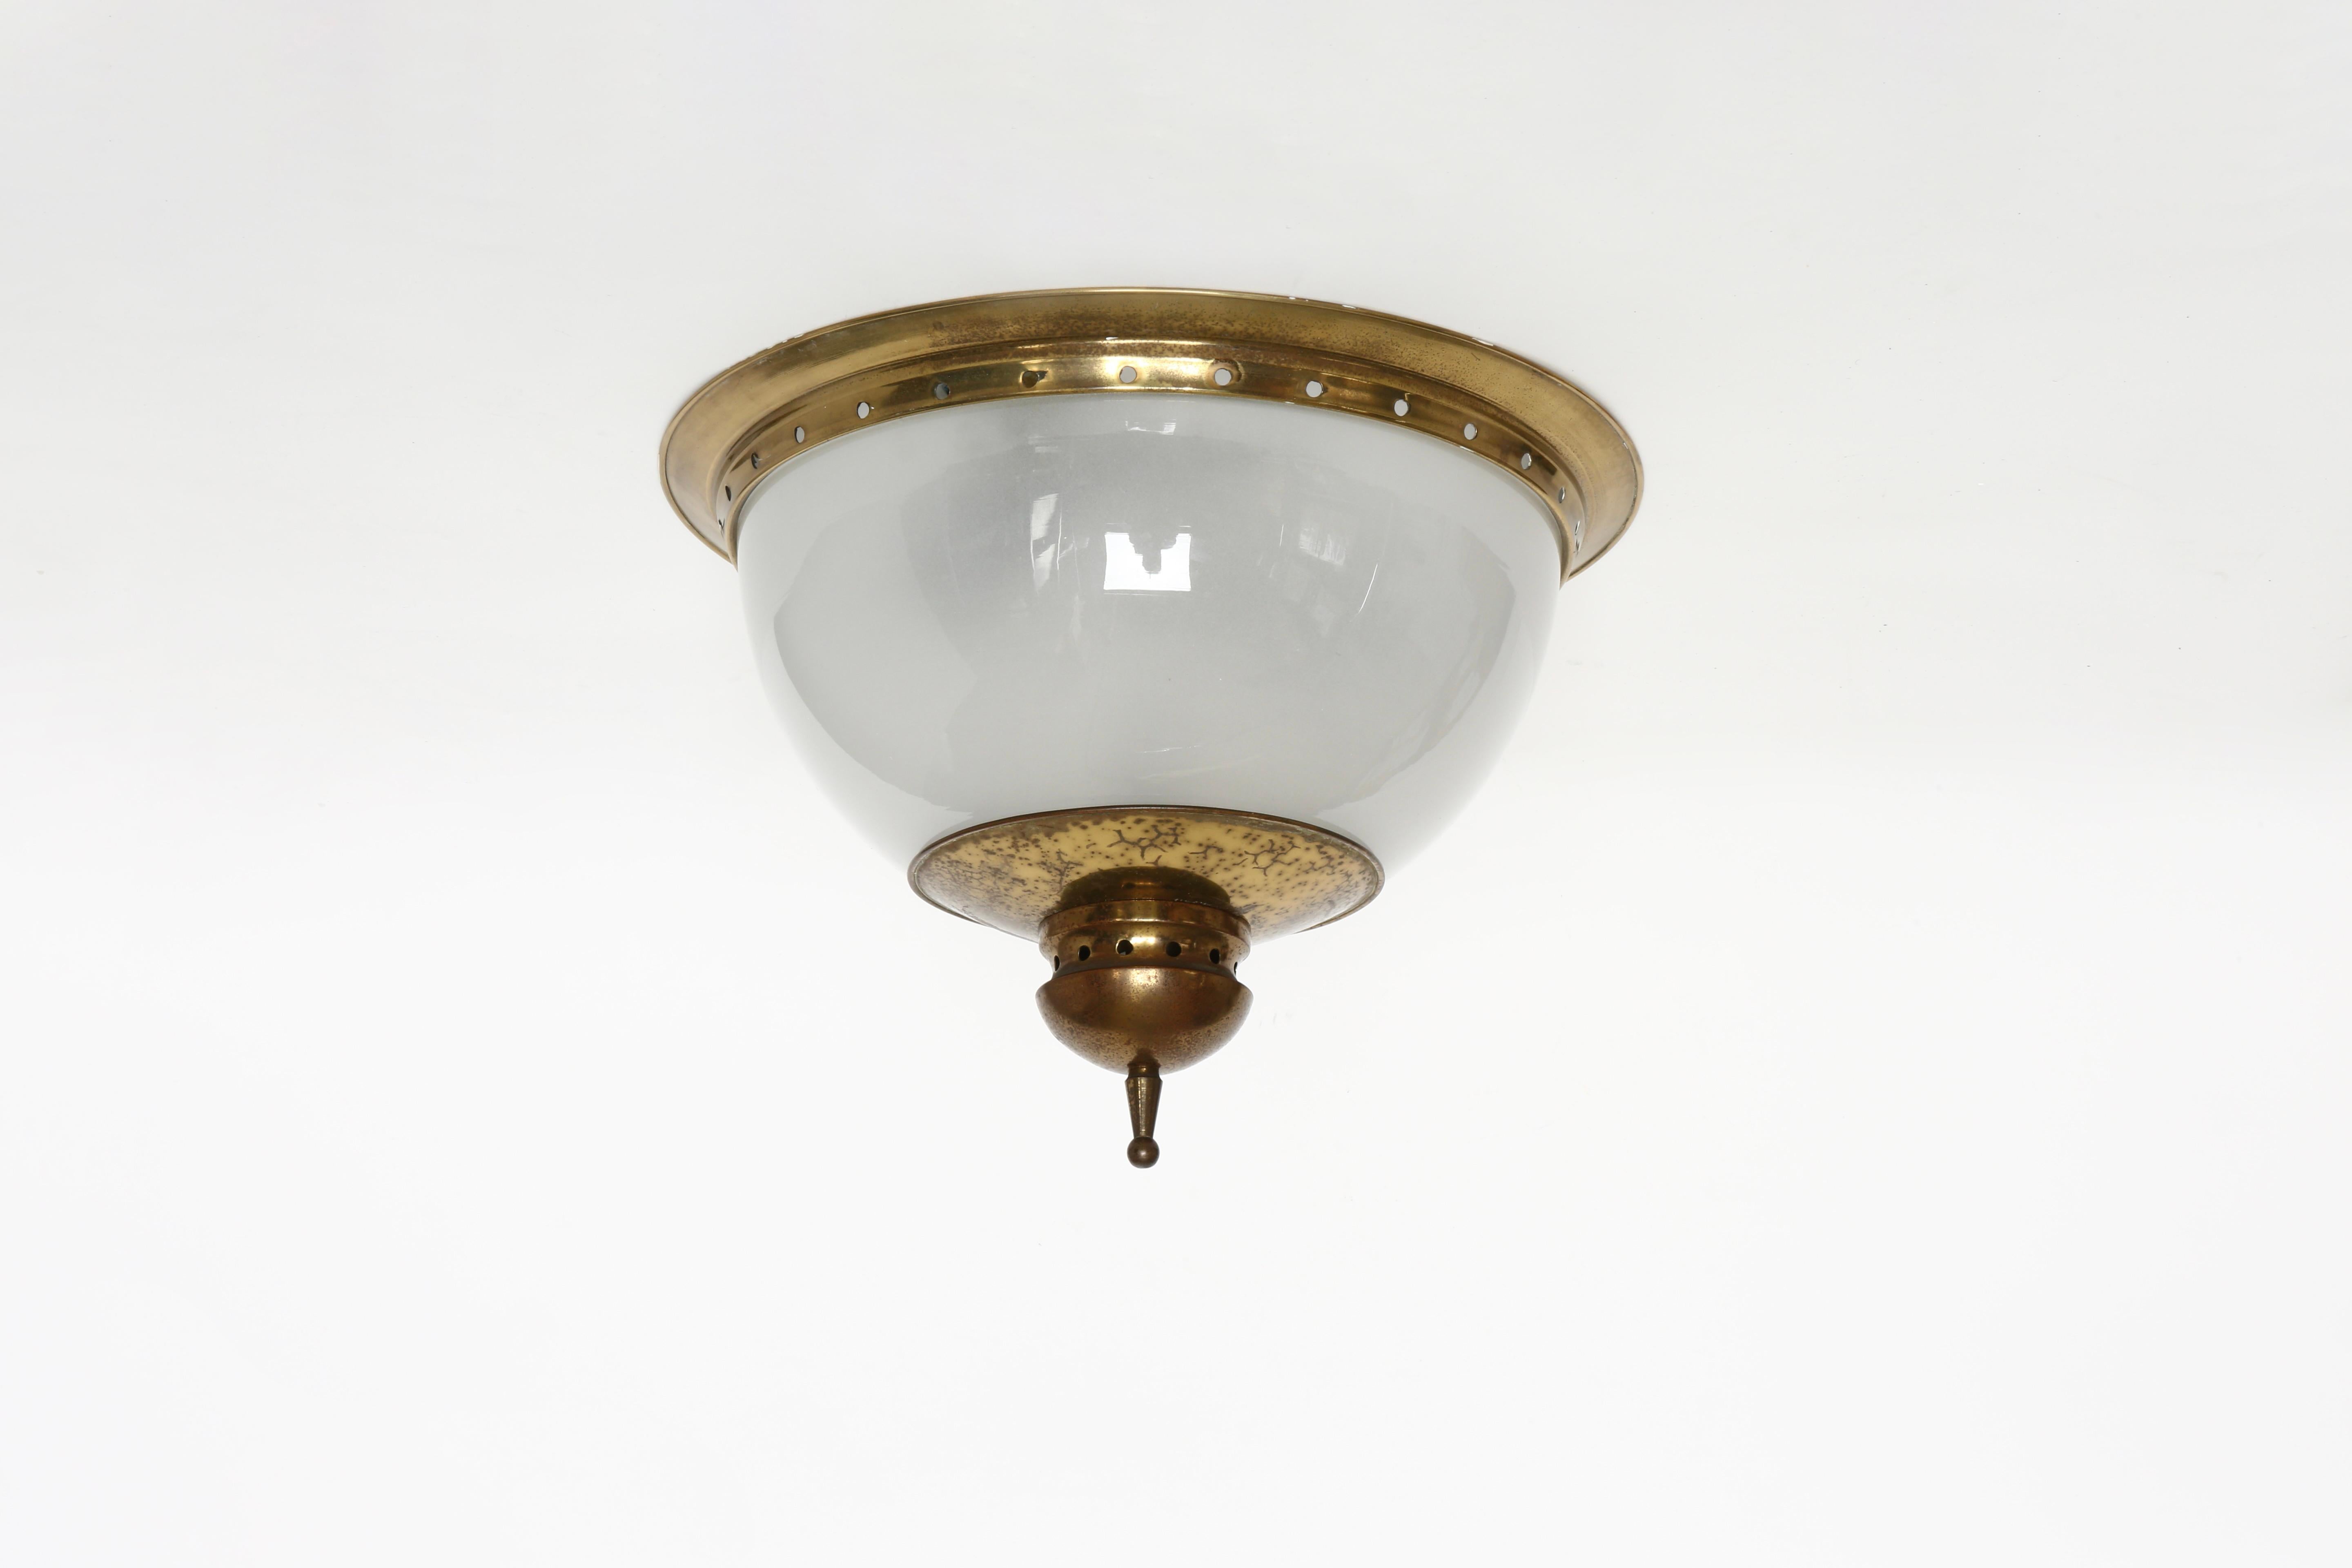 Luigi Caccia Dominioni for Azucena wall or ceiling light
Made in Italy, 1960s
Opalescent glass, brass
Takes 2 medium base bulbs
Complimentary US rewiring upon request
Price is for 1 light
2 lights are available.

At Illustris Lighting our main focus